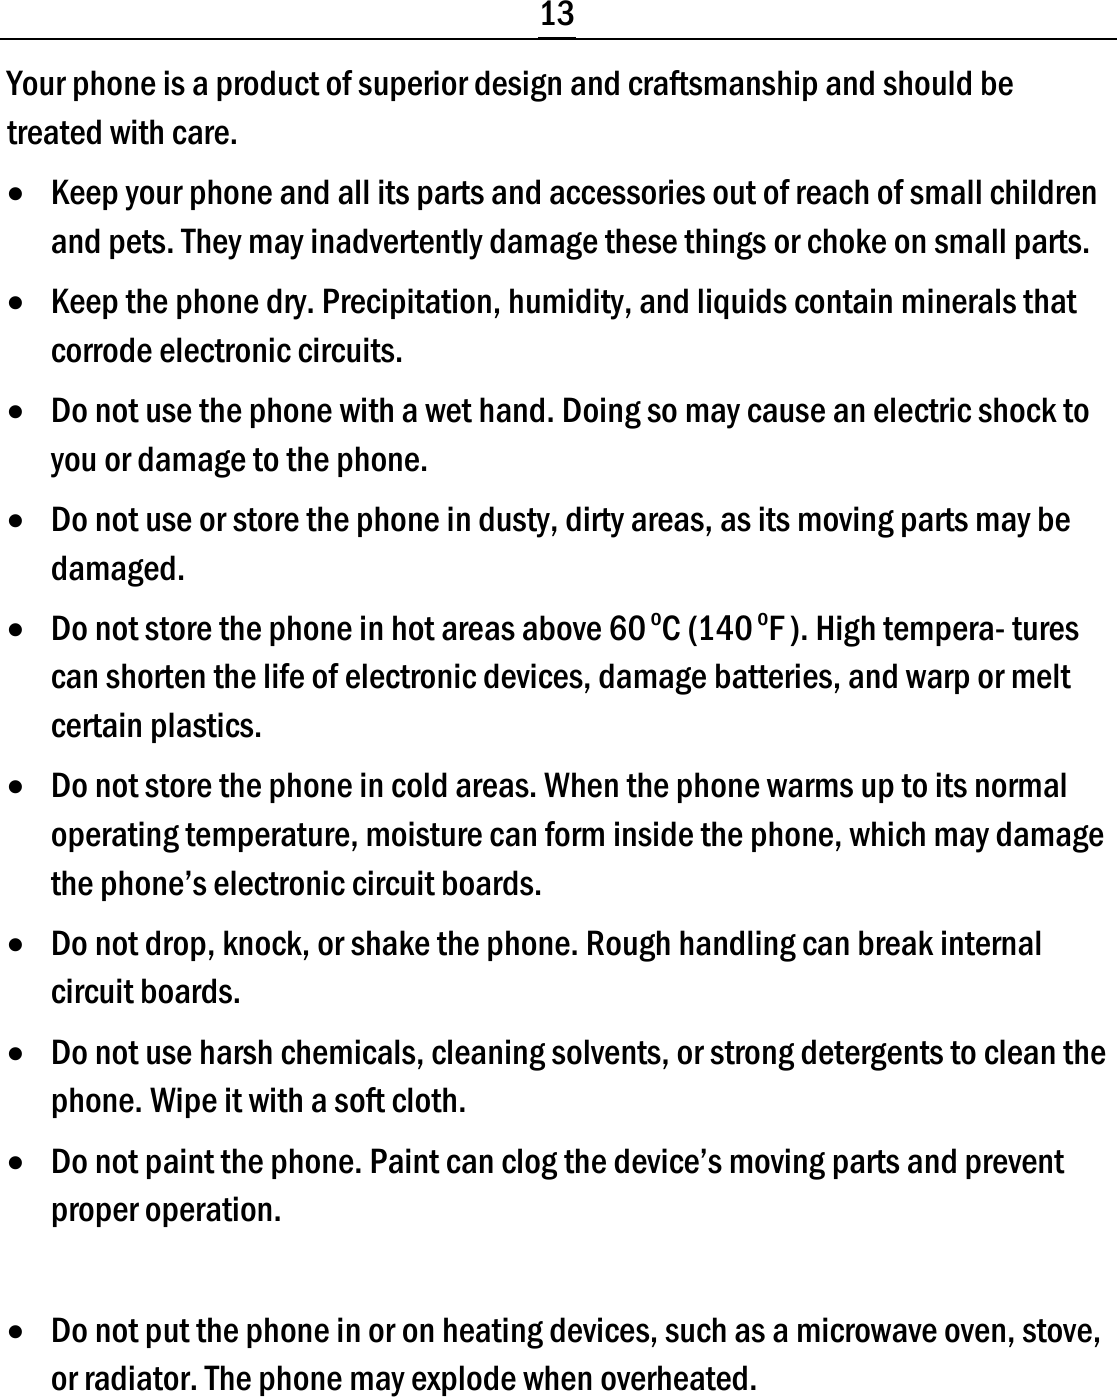  13 Your phone is a product of superior design and craftsmanship and should be treated with care. • Keep your phone and all its parts and accessories out of reach of small children and pets. They may inadvertently damage these things or choke on small parts. • Keep the phone dry. Precipitation, humidity, and liquids contain minerals that corrode electronic circuits. • Do not use the phone with a wet hand. Doing so may cause an electric shock to you or damage to the phone. • Do not use or store the phone in dusty, dirty areas, as its moving parts may be damaged. • Do not store the phone in hot areas above 60 oC (140 oF ). High tempera- tures can shorten the life of electronic devices, damage batteries, and warp or melt certain plastics. • Do not store the phone in cold areas. When the phone warms up to its normal operating temperature, moisture can form inside the phone, which may damage the phone’s electronic circuit boards. • Do not drop, knock, or shake the phone. Rough handling can break internal circuit boards. • Do not use harsh chemicals, cleaning solvents, or strong detergents to clean the phone. Wipe it with a soft cloth. • Do not paint the phone. Paint can clog the device’s moving parts and prevent proper operation.  • Do not put the phone in or on heating devices, such as a microwave oven, stove, or radiator. The phone may explode when overheated. 